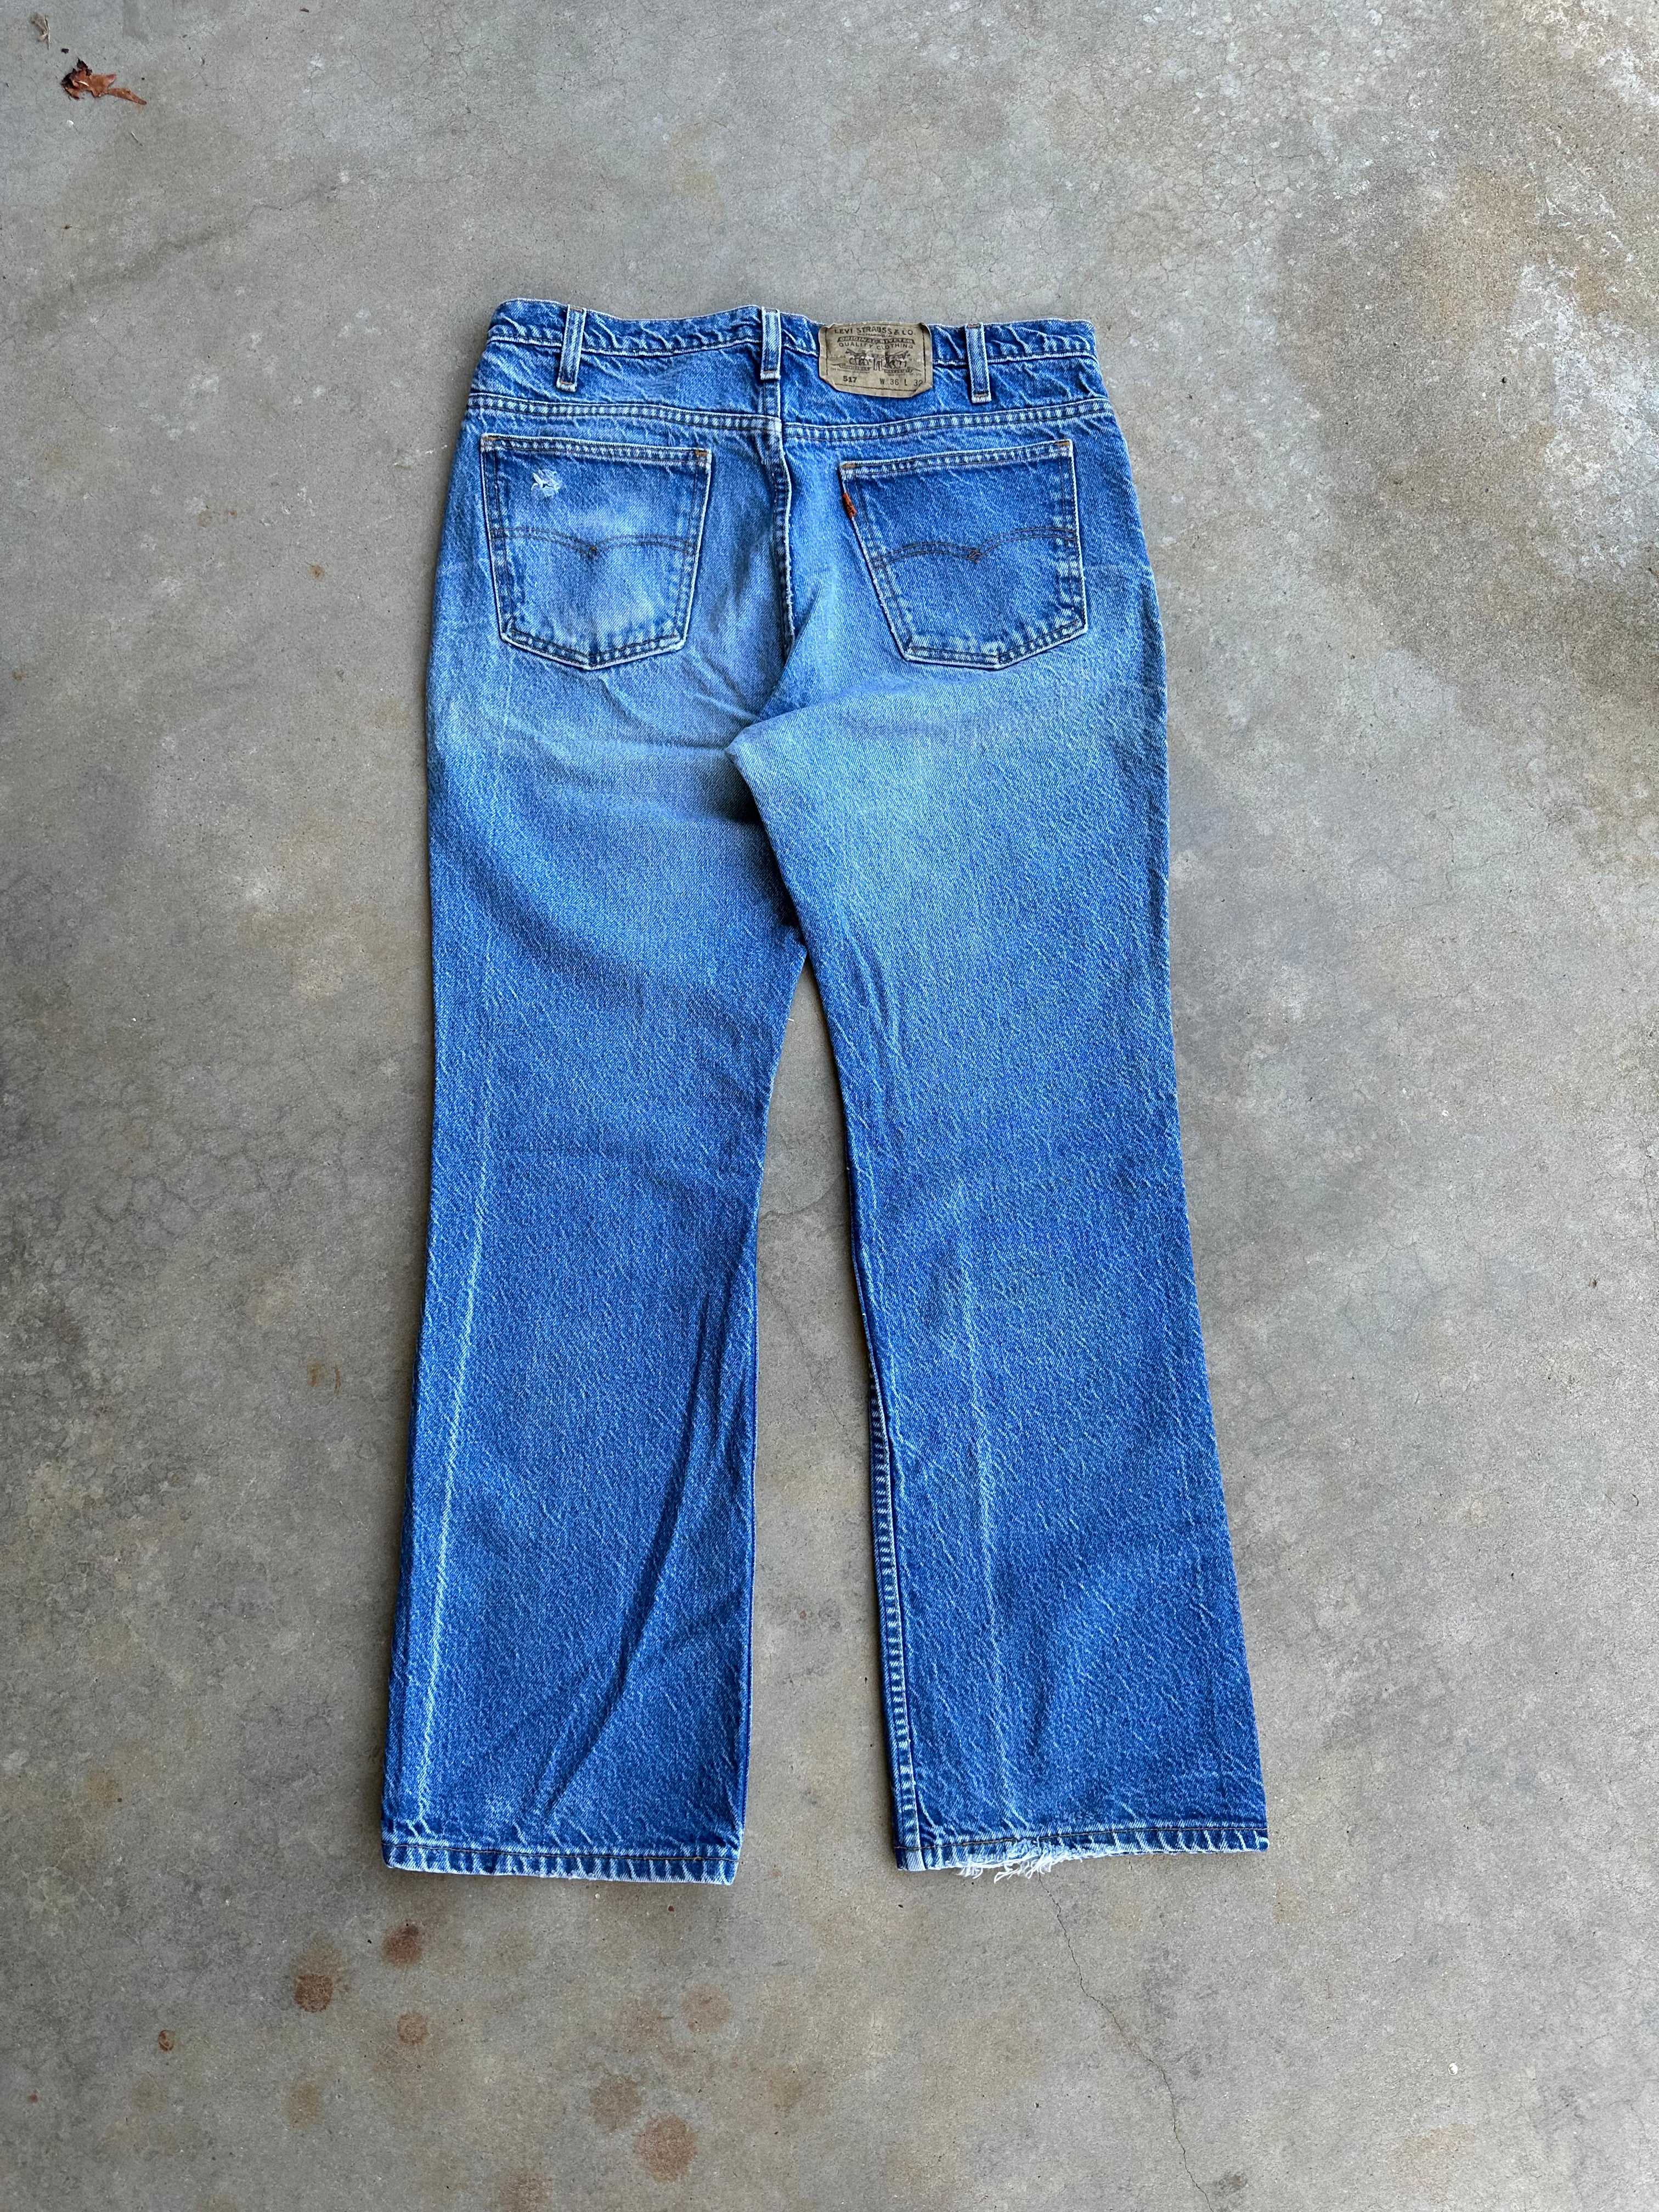 1993 Levi’s 517 Flare Jeans (34"x30")